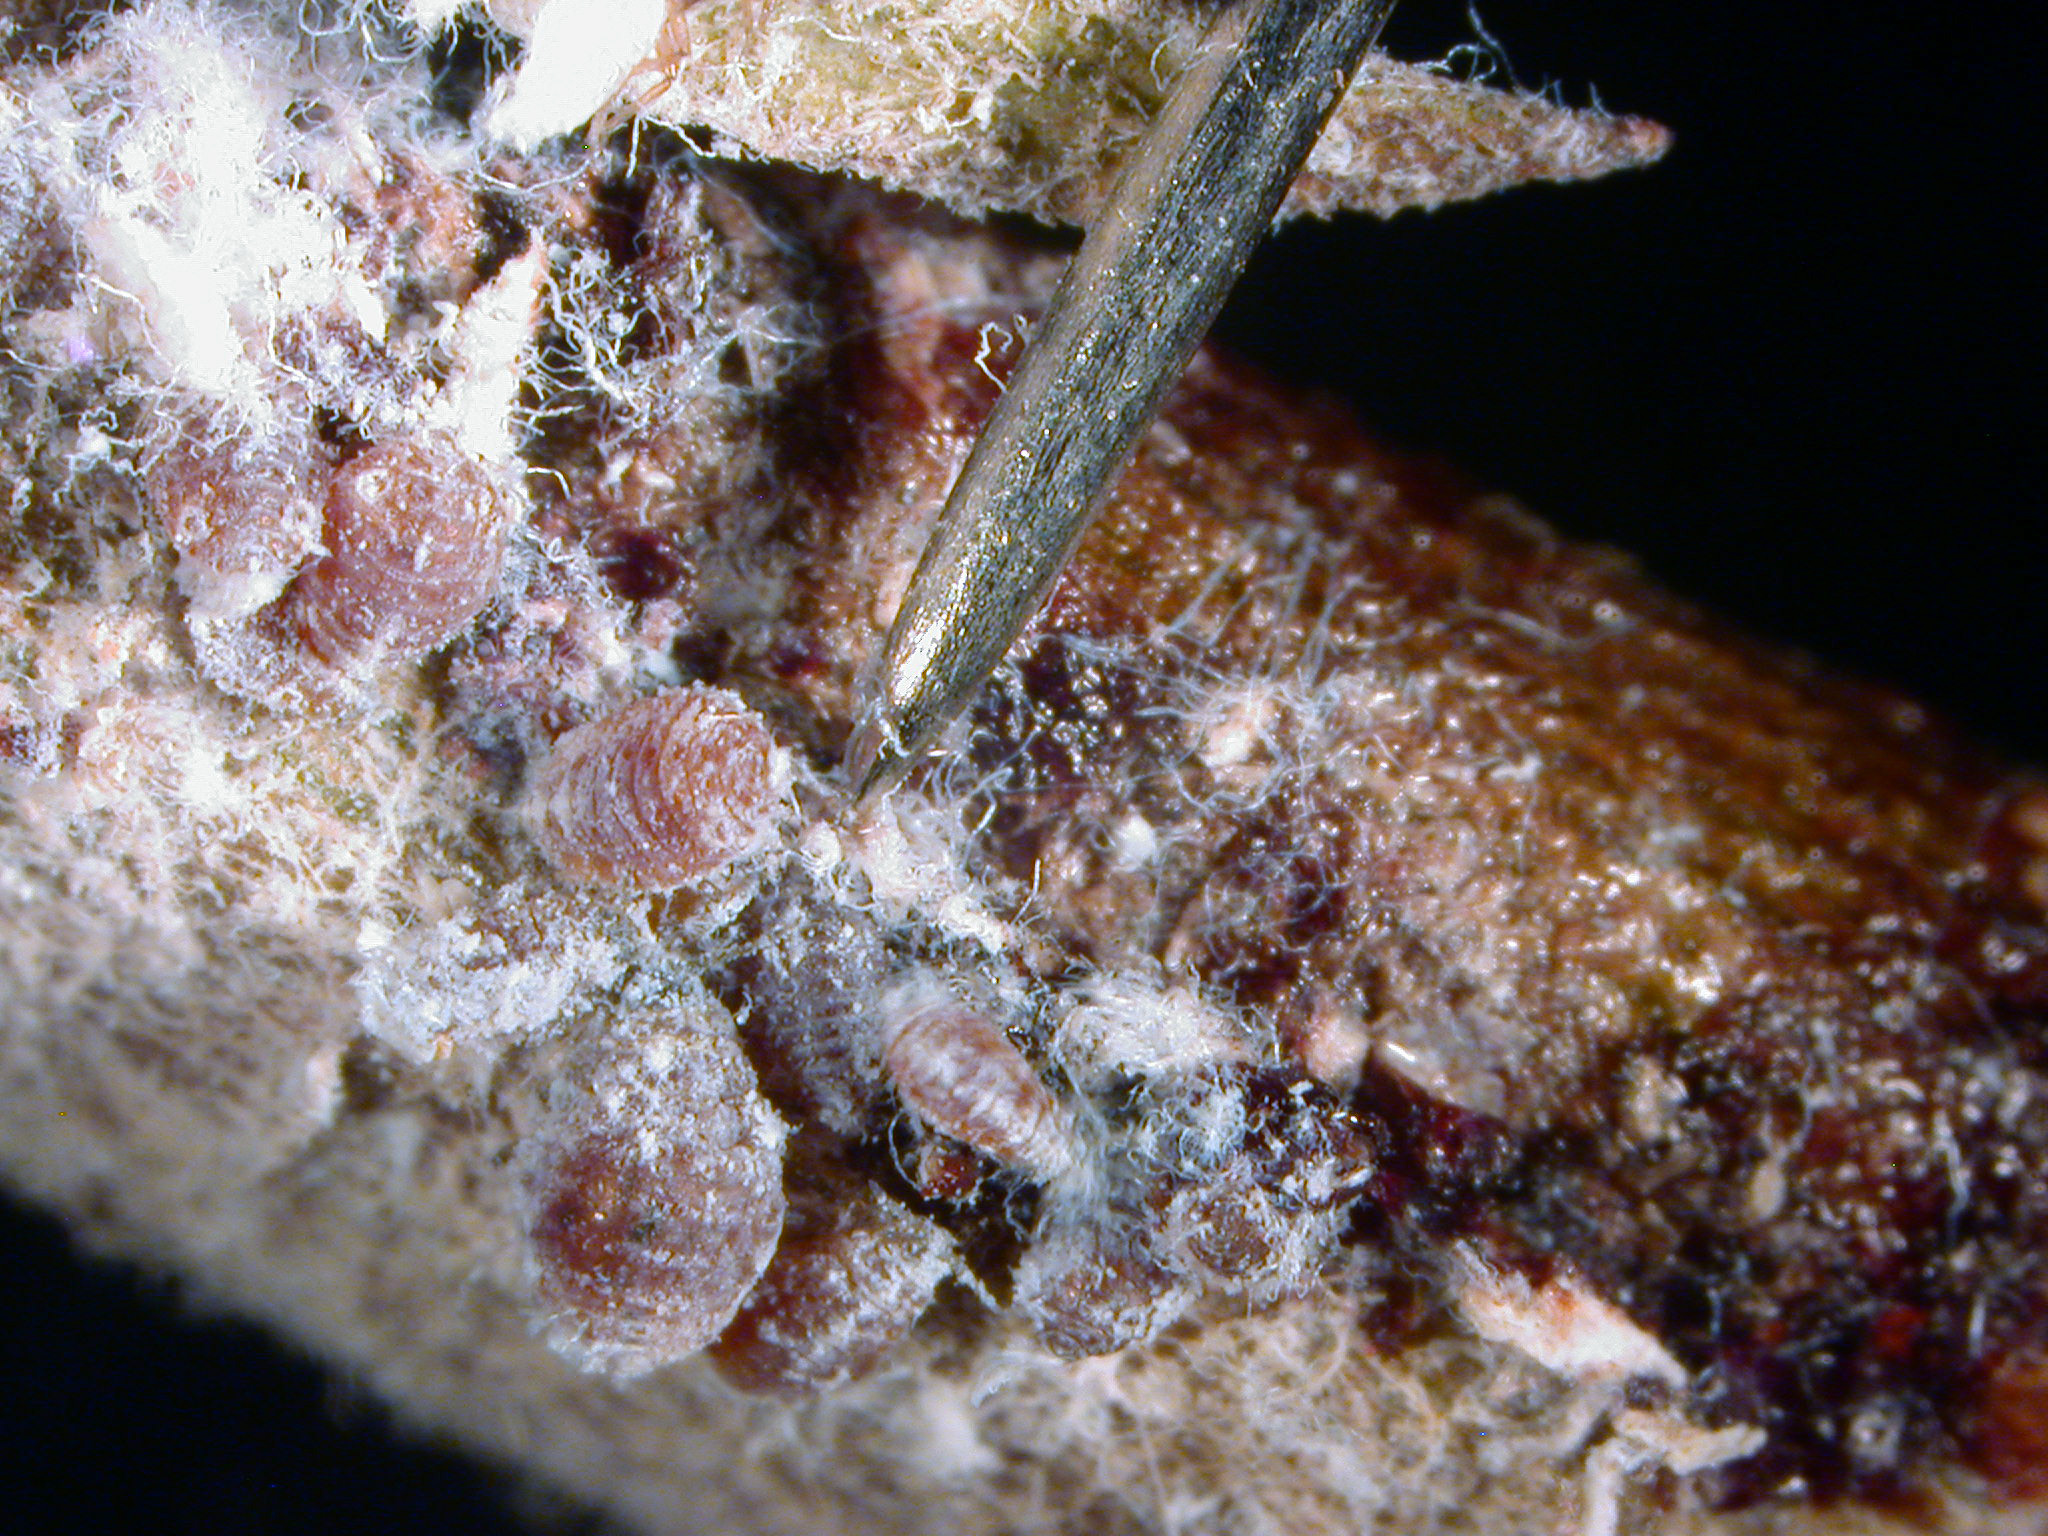 Figure 3. Woolly apple aphids and their waxy secretions on a cherry tree branch. (<em>Photo credit: John Obermeyer, Purdue Entomology</em>)